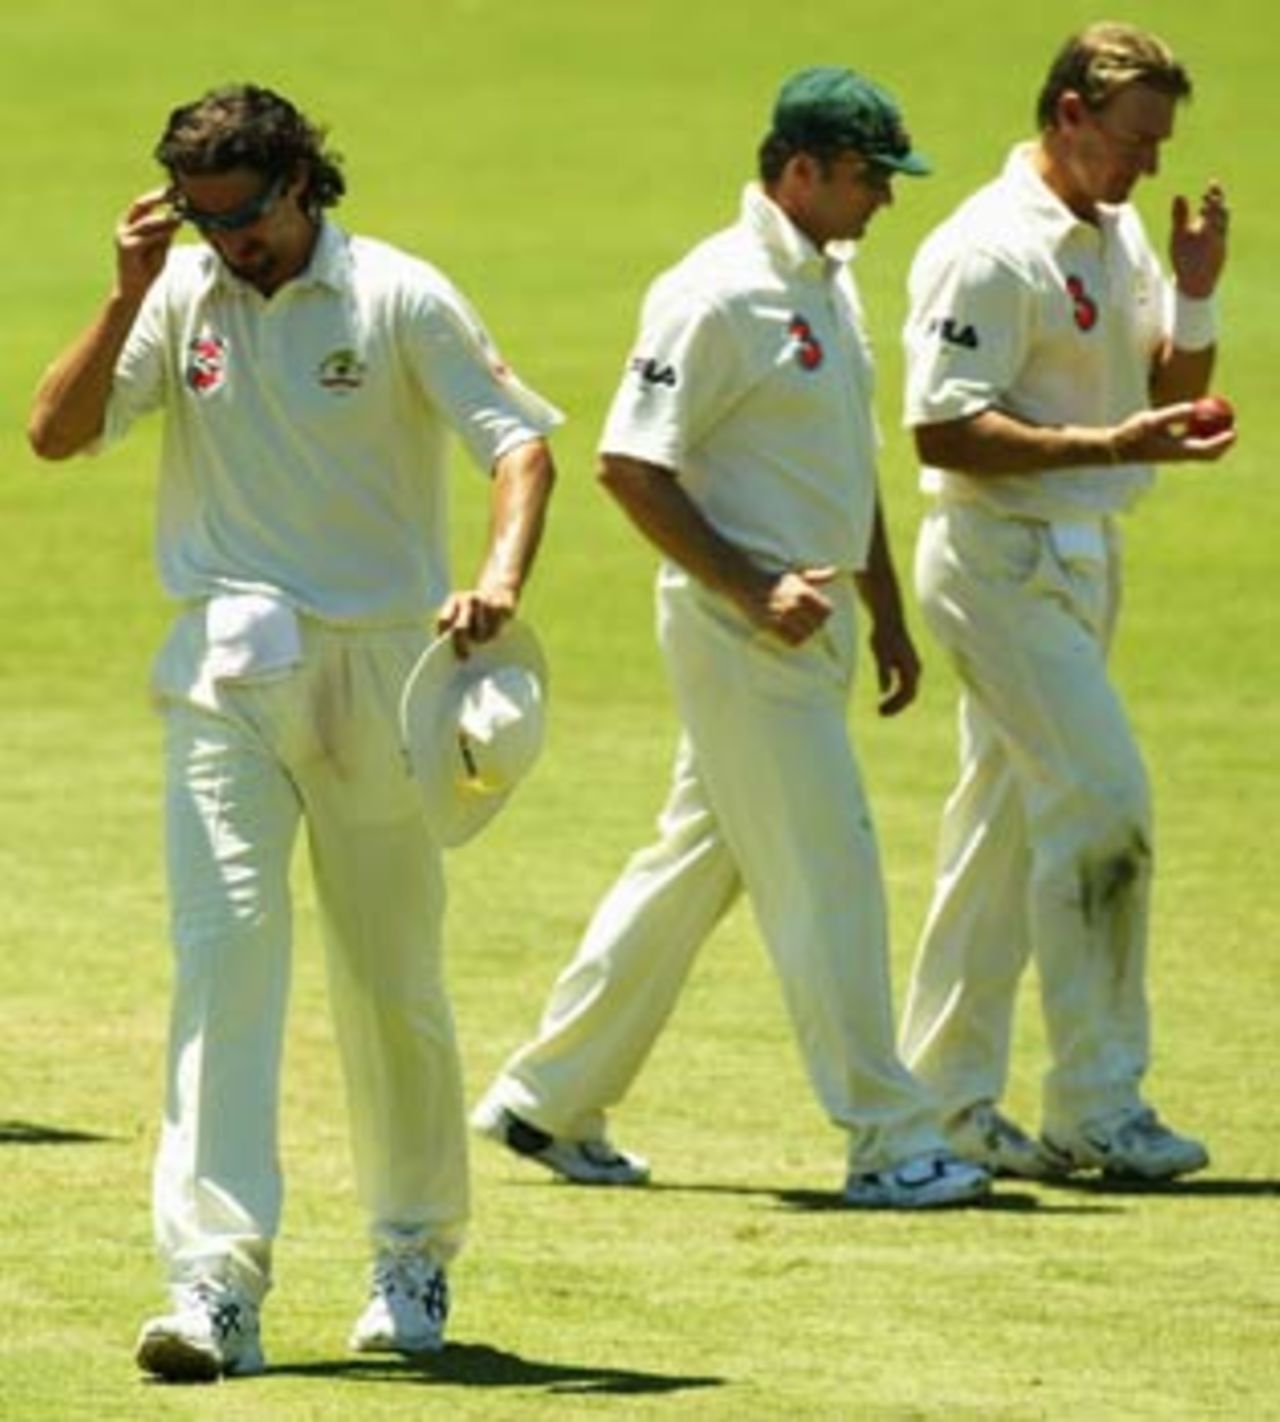 Gillespie finally strained his groin and had to leave the field, Australia v India, 2nd Test, Adelaide, 5th day, December 16, 2003